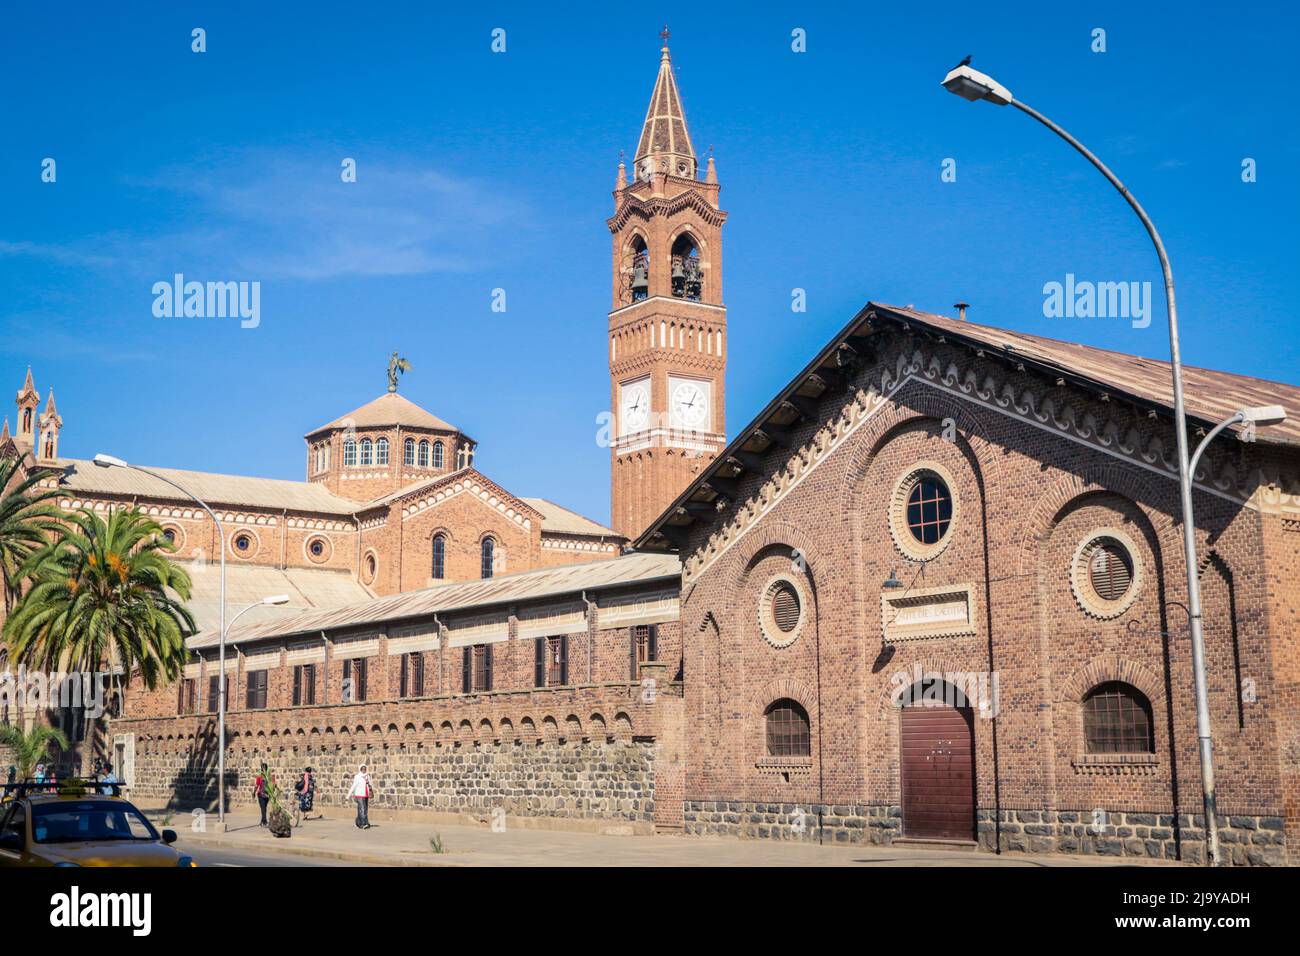 Old Brick Building of the Church of Our Lady of the Rosary in Asmara Stock Photo